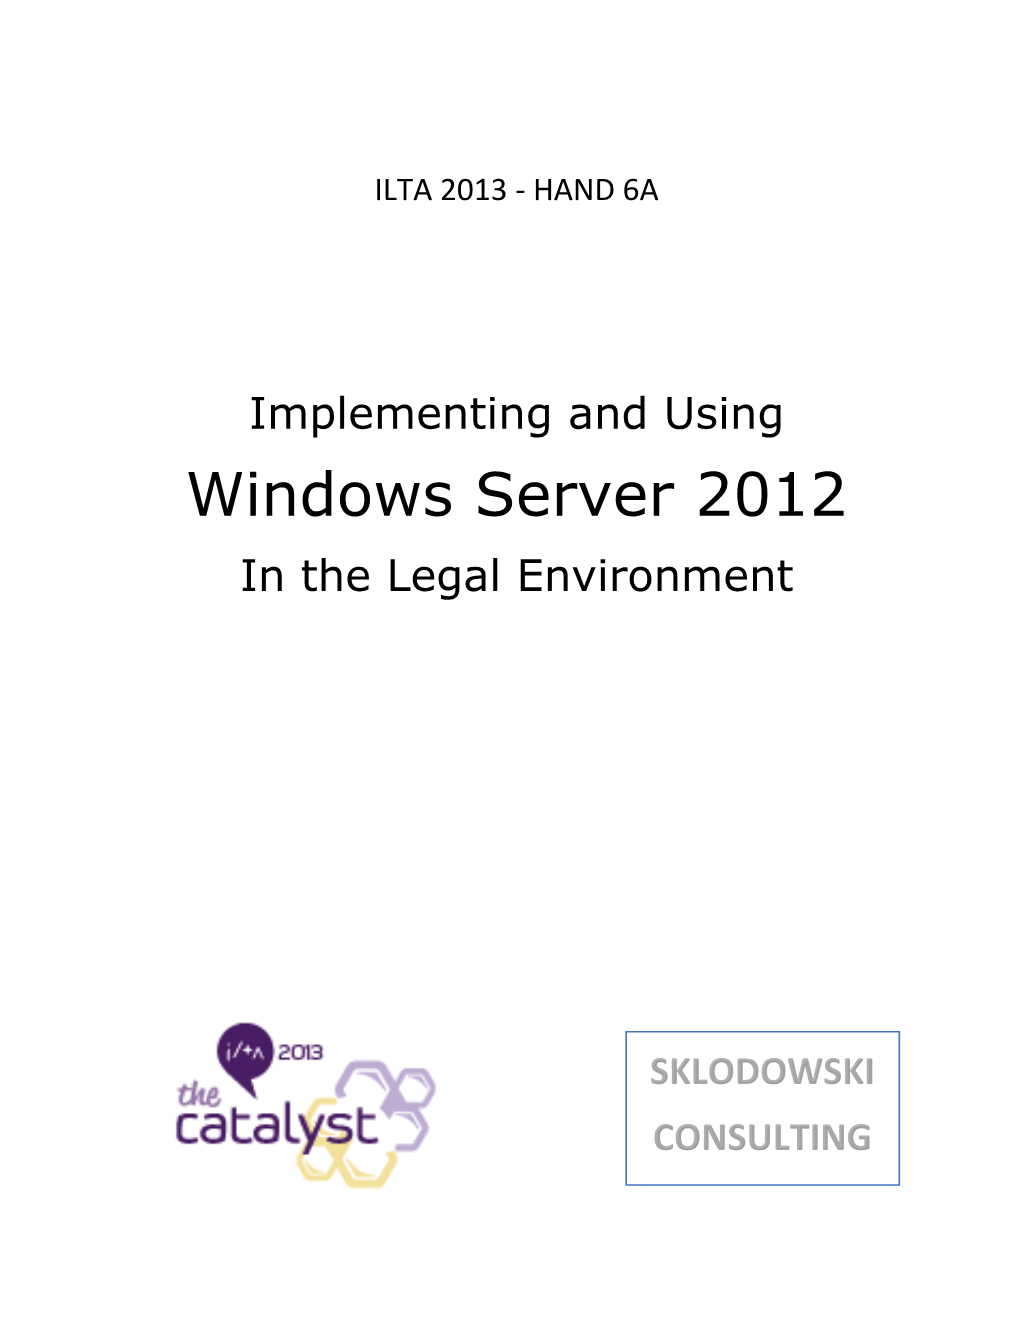 Implementing and Using Windows Server 2012 in the Legal Environment